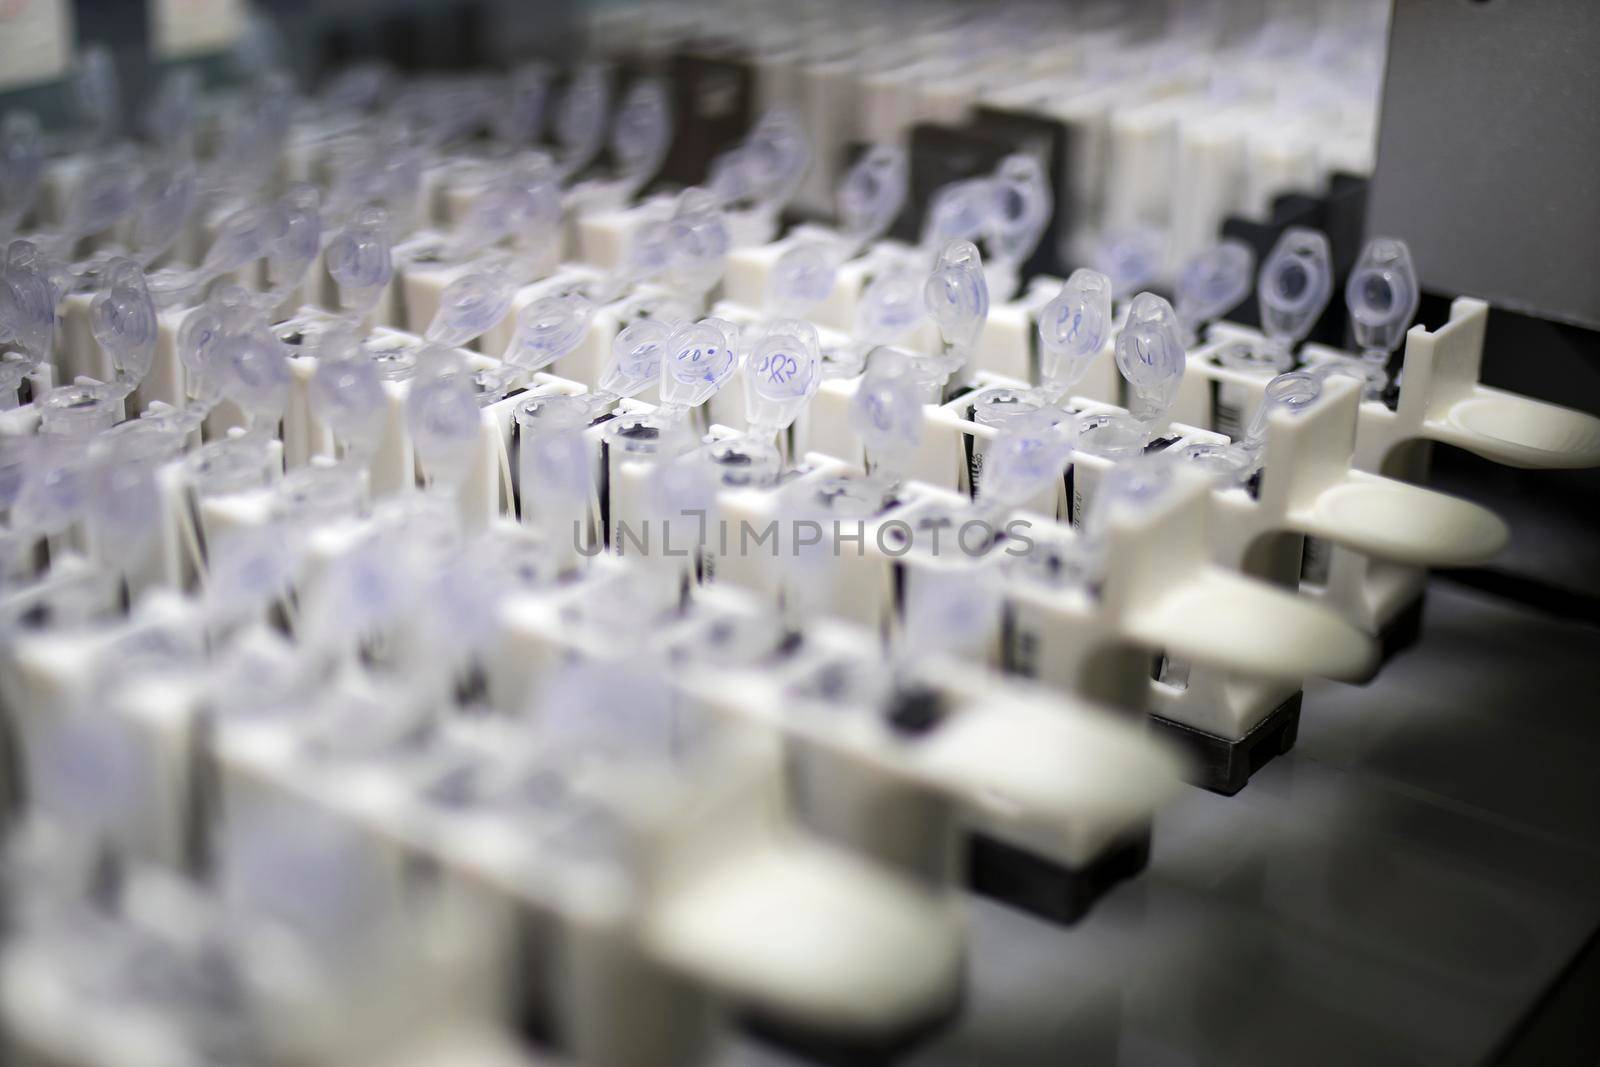 Test tubes in the laboratory in which PCR tests are done for the determination of coronavirus by elenarostunova